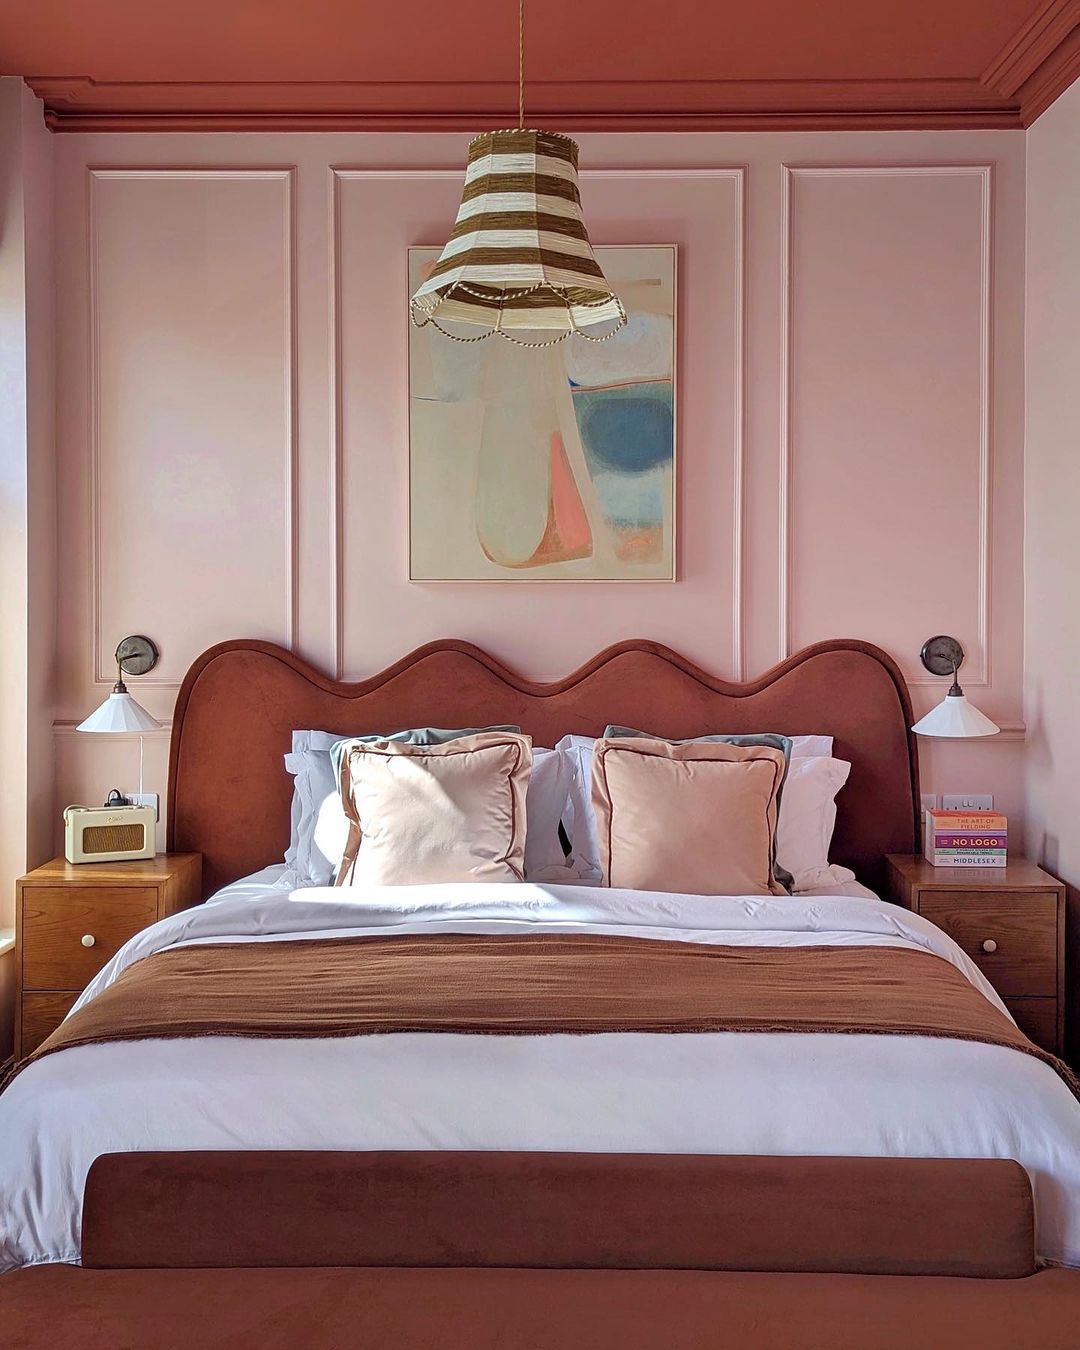 Greenhouse interiors - wavy curved headboard in pink and terracotta bedroom